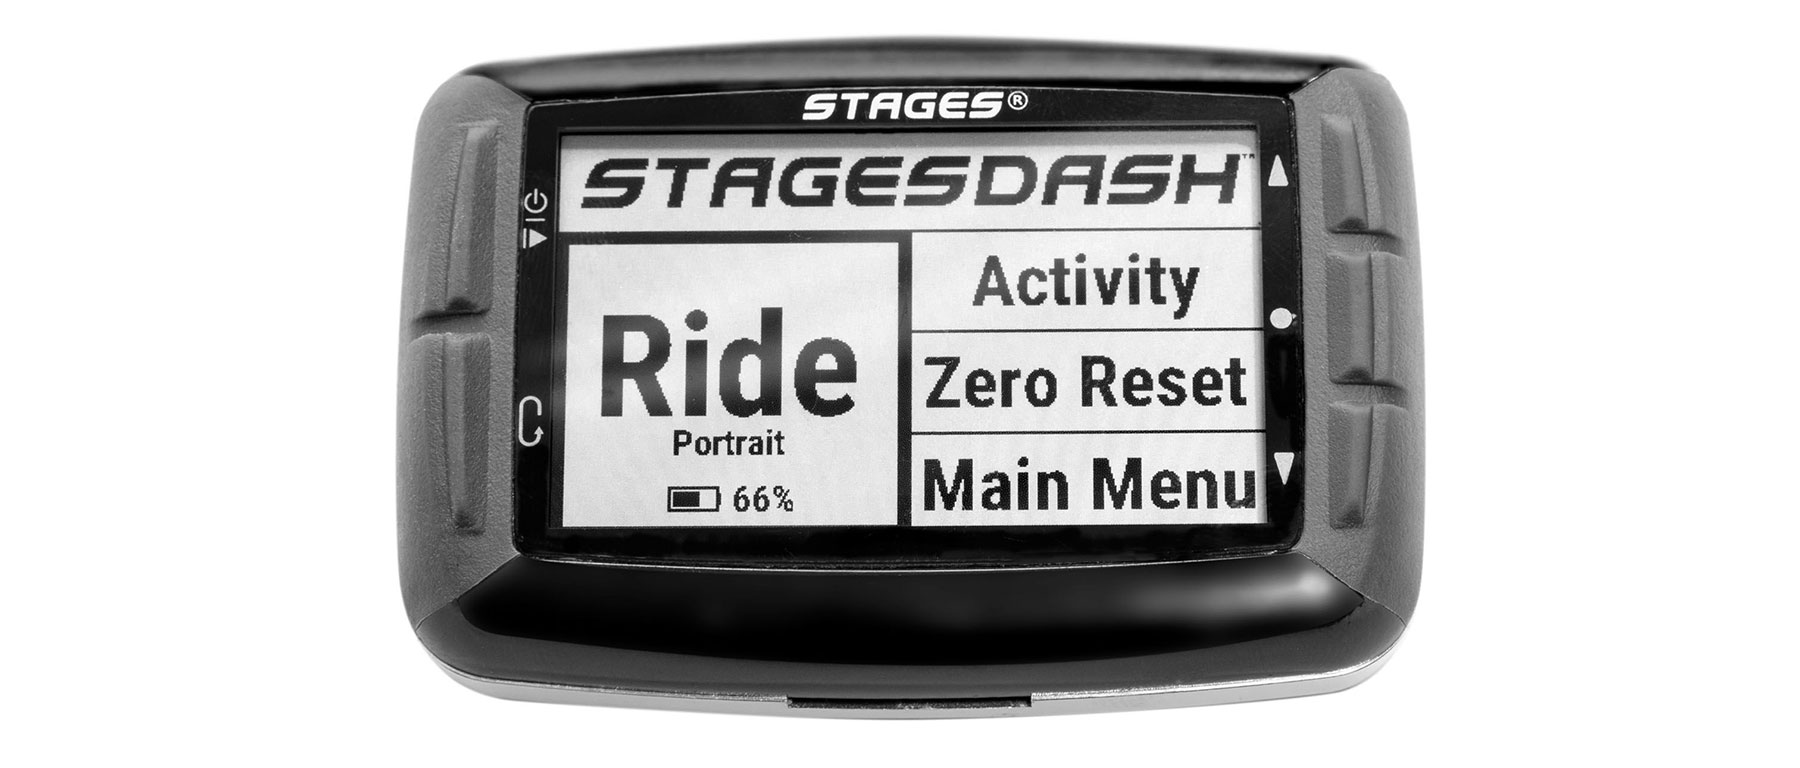 Stages Dash L10 Cycling Computer